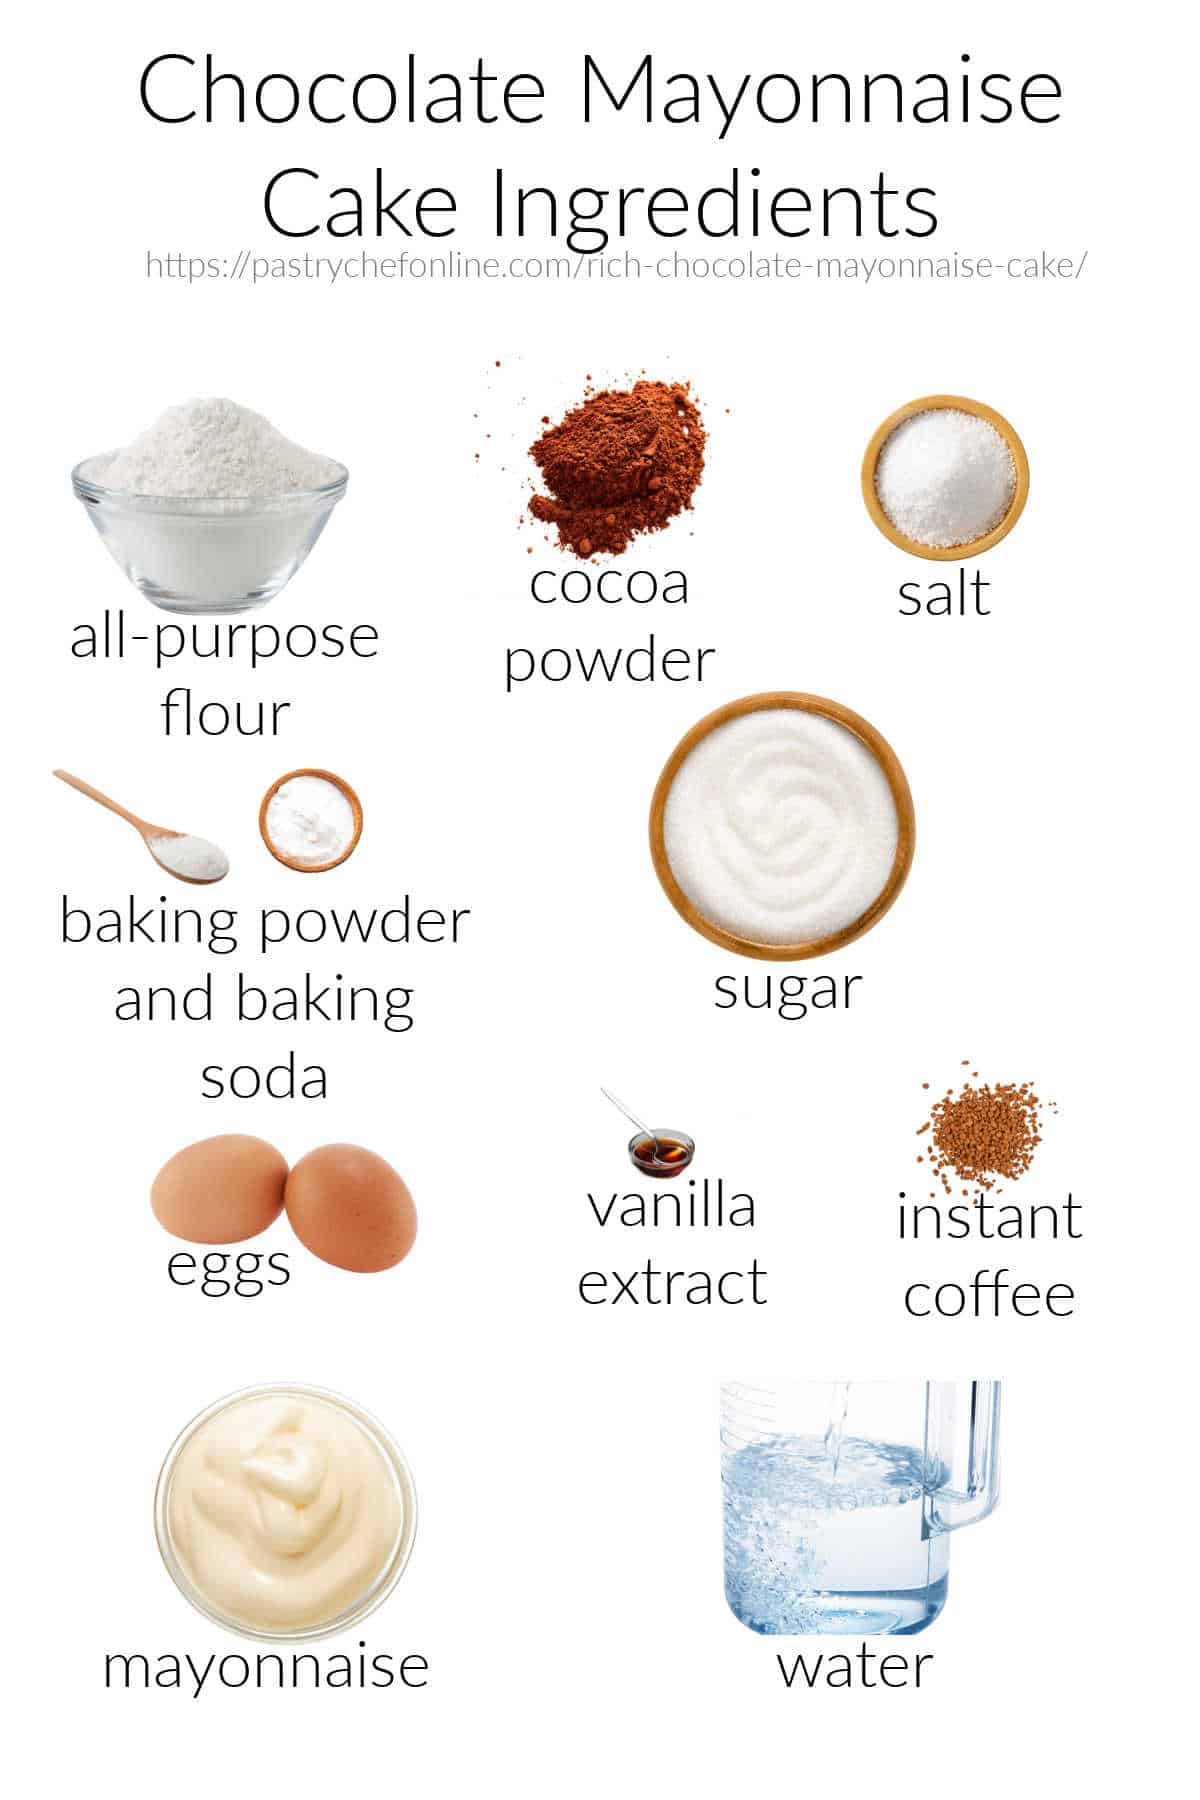 Images of all the ingredients needed to make rocky road cake, labeled and shot on a white background.